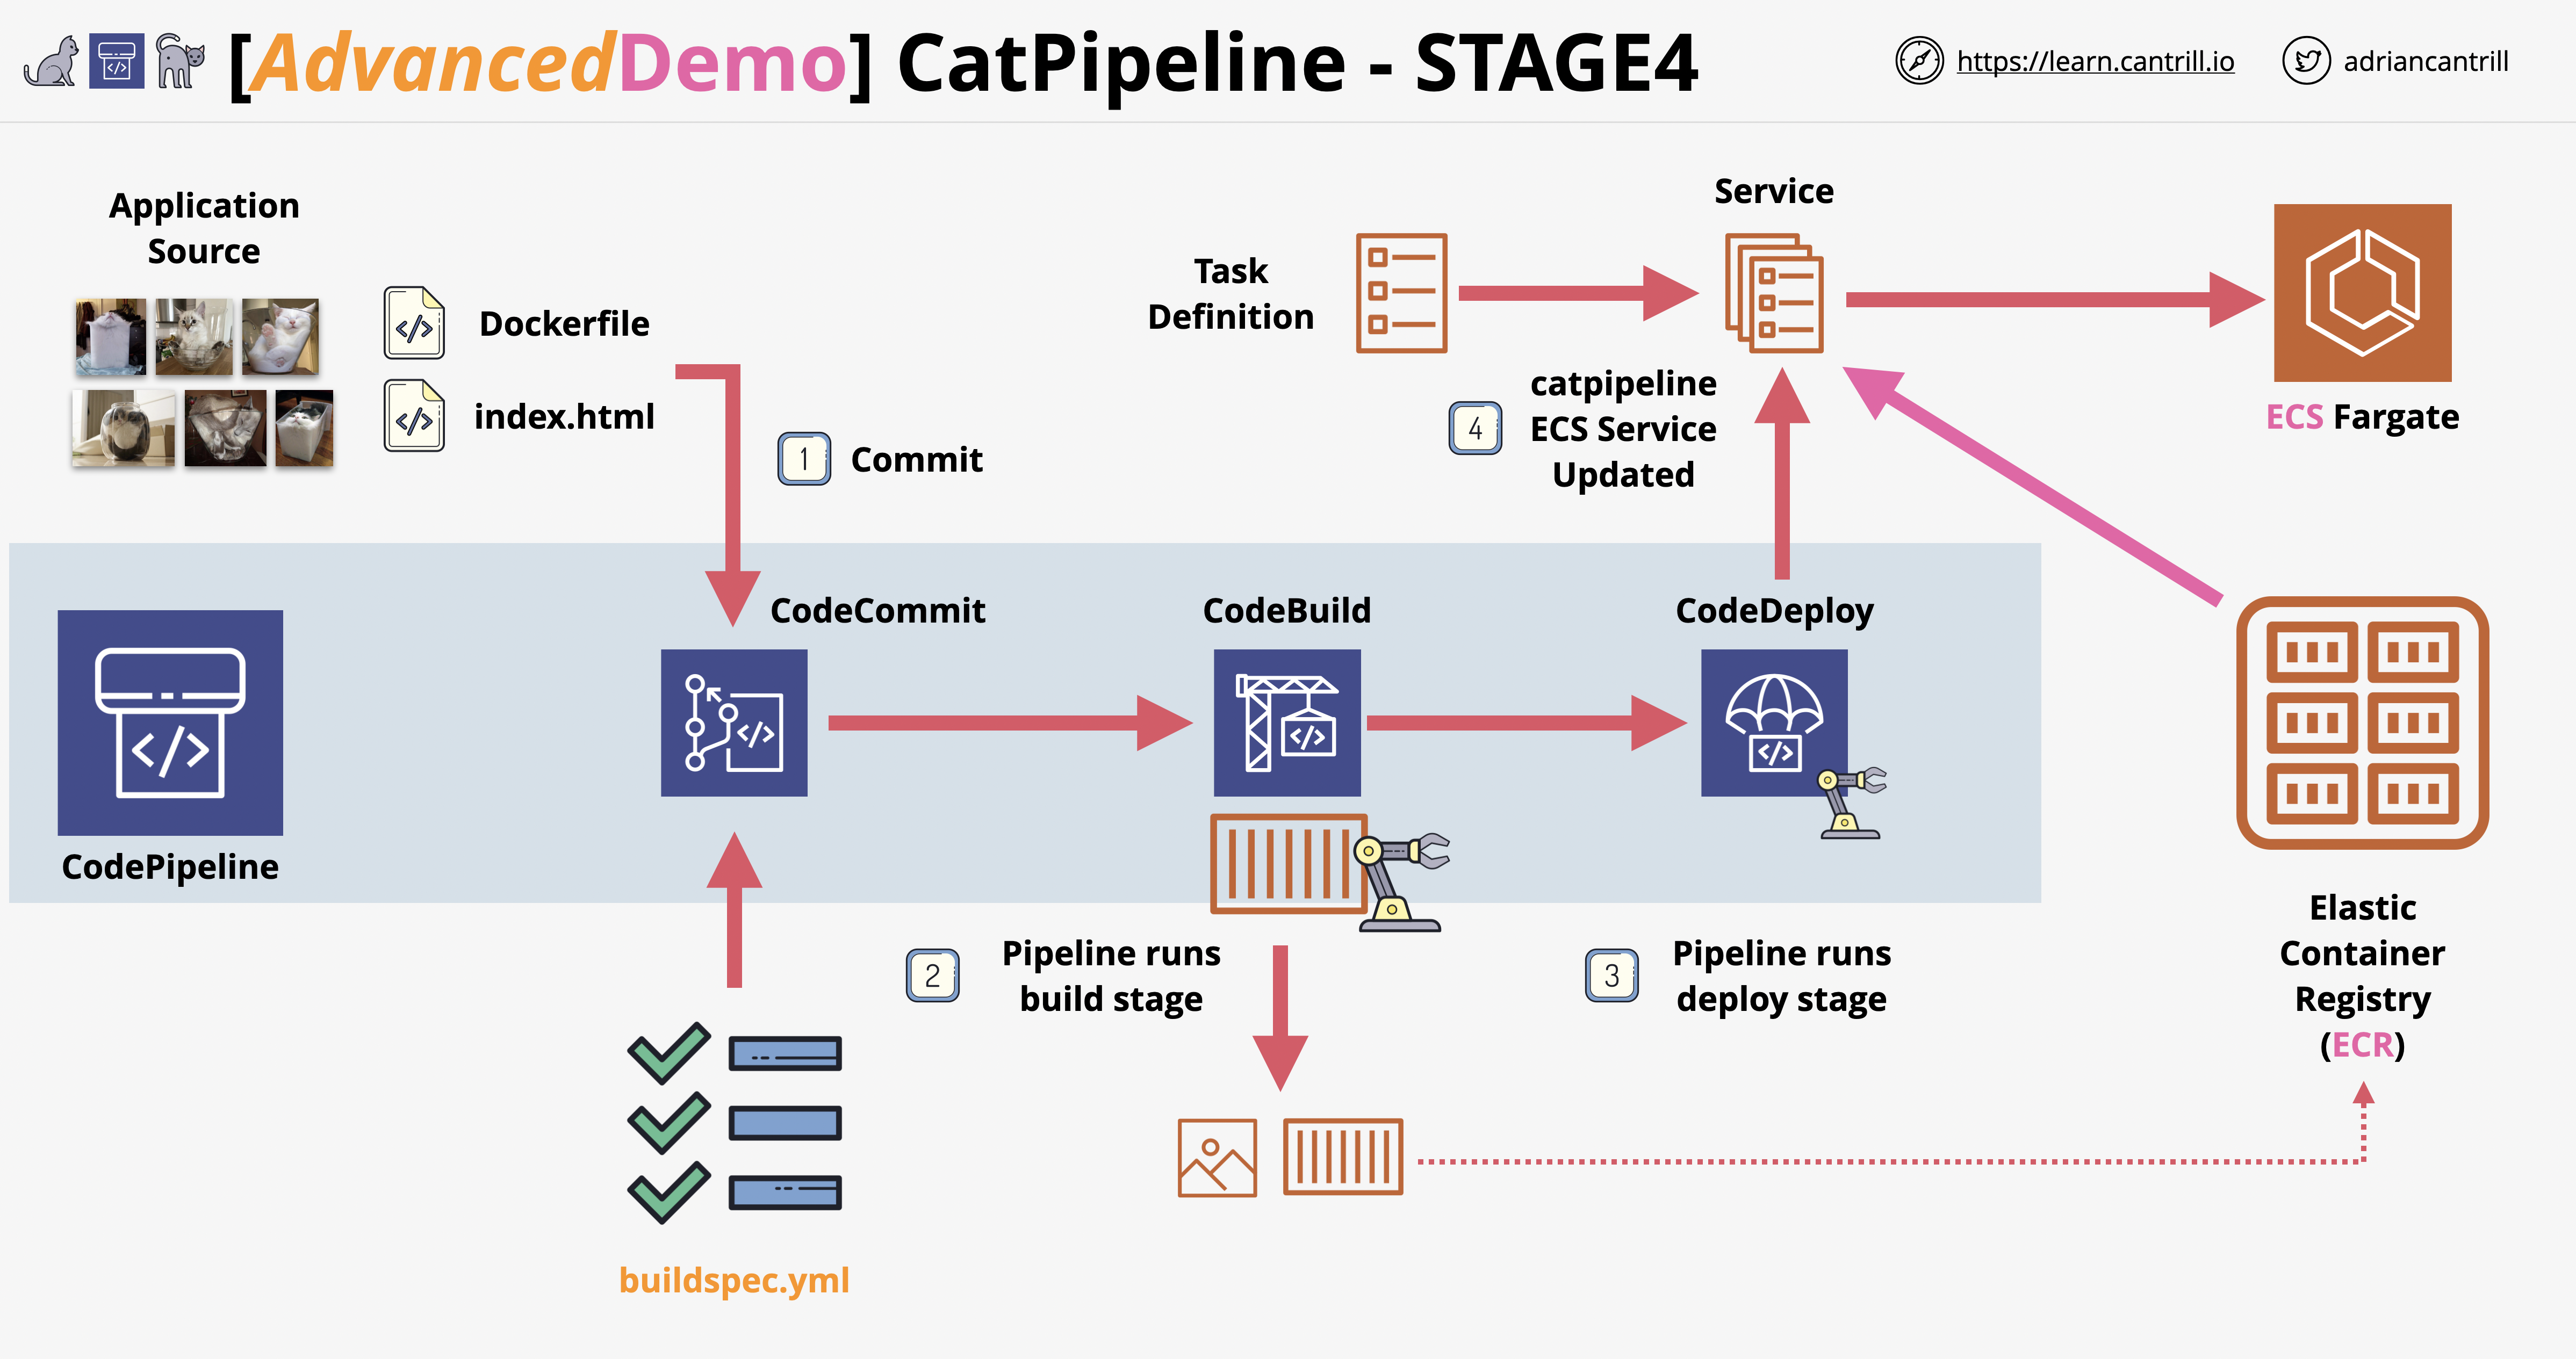 catpipeline-arch-stage4.png